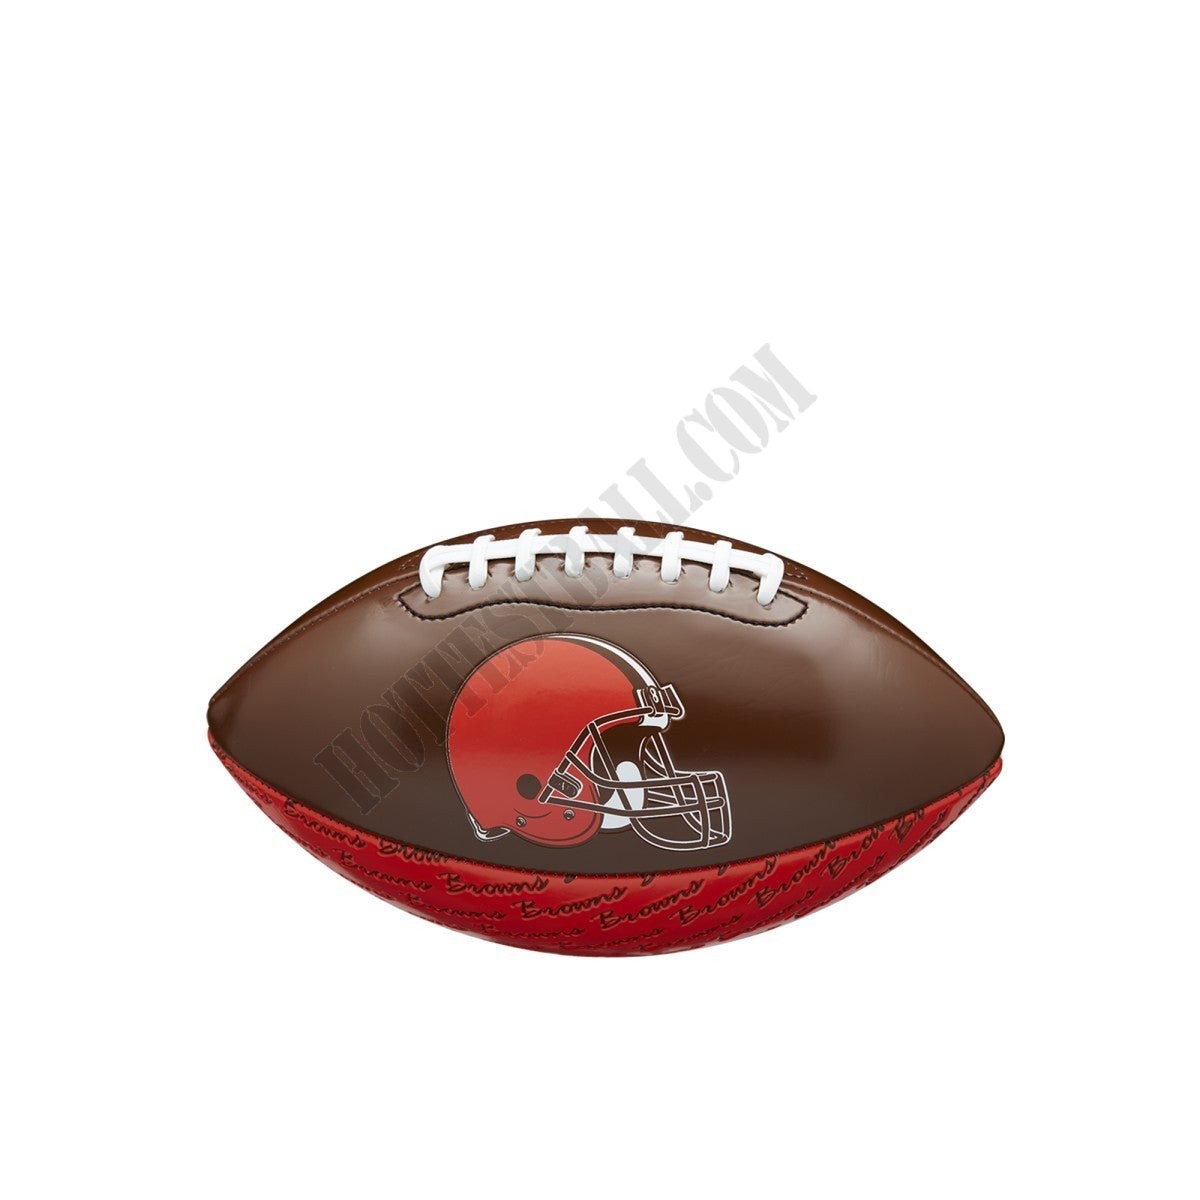 NFL City Pride Football - Cleveland Browns ● Wilson Promotions - NFL City Pride Football - Cleveland Browns ● Wilson Promotions